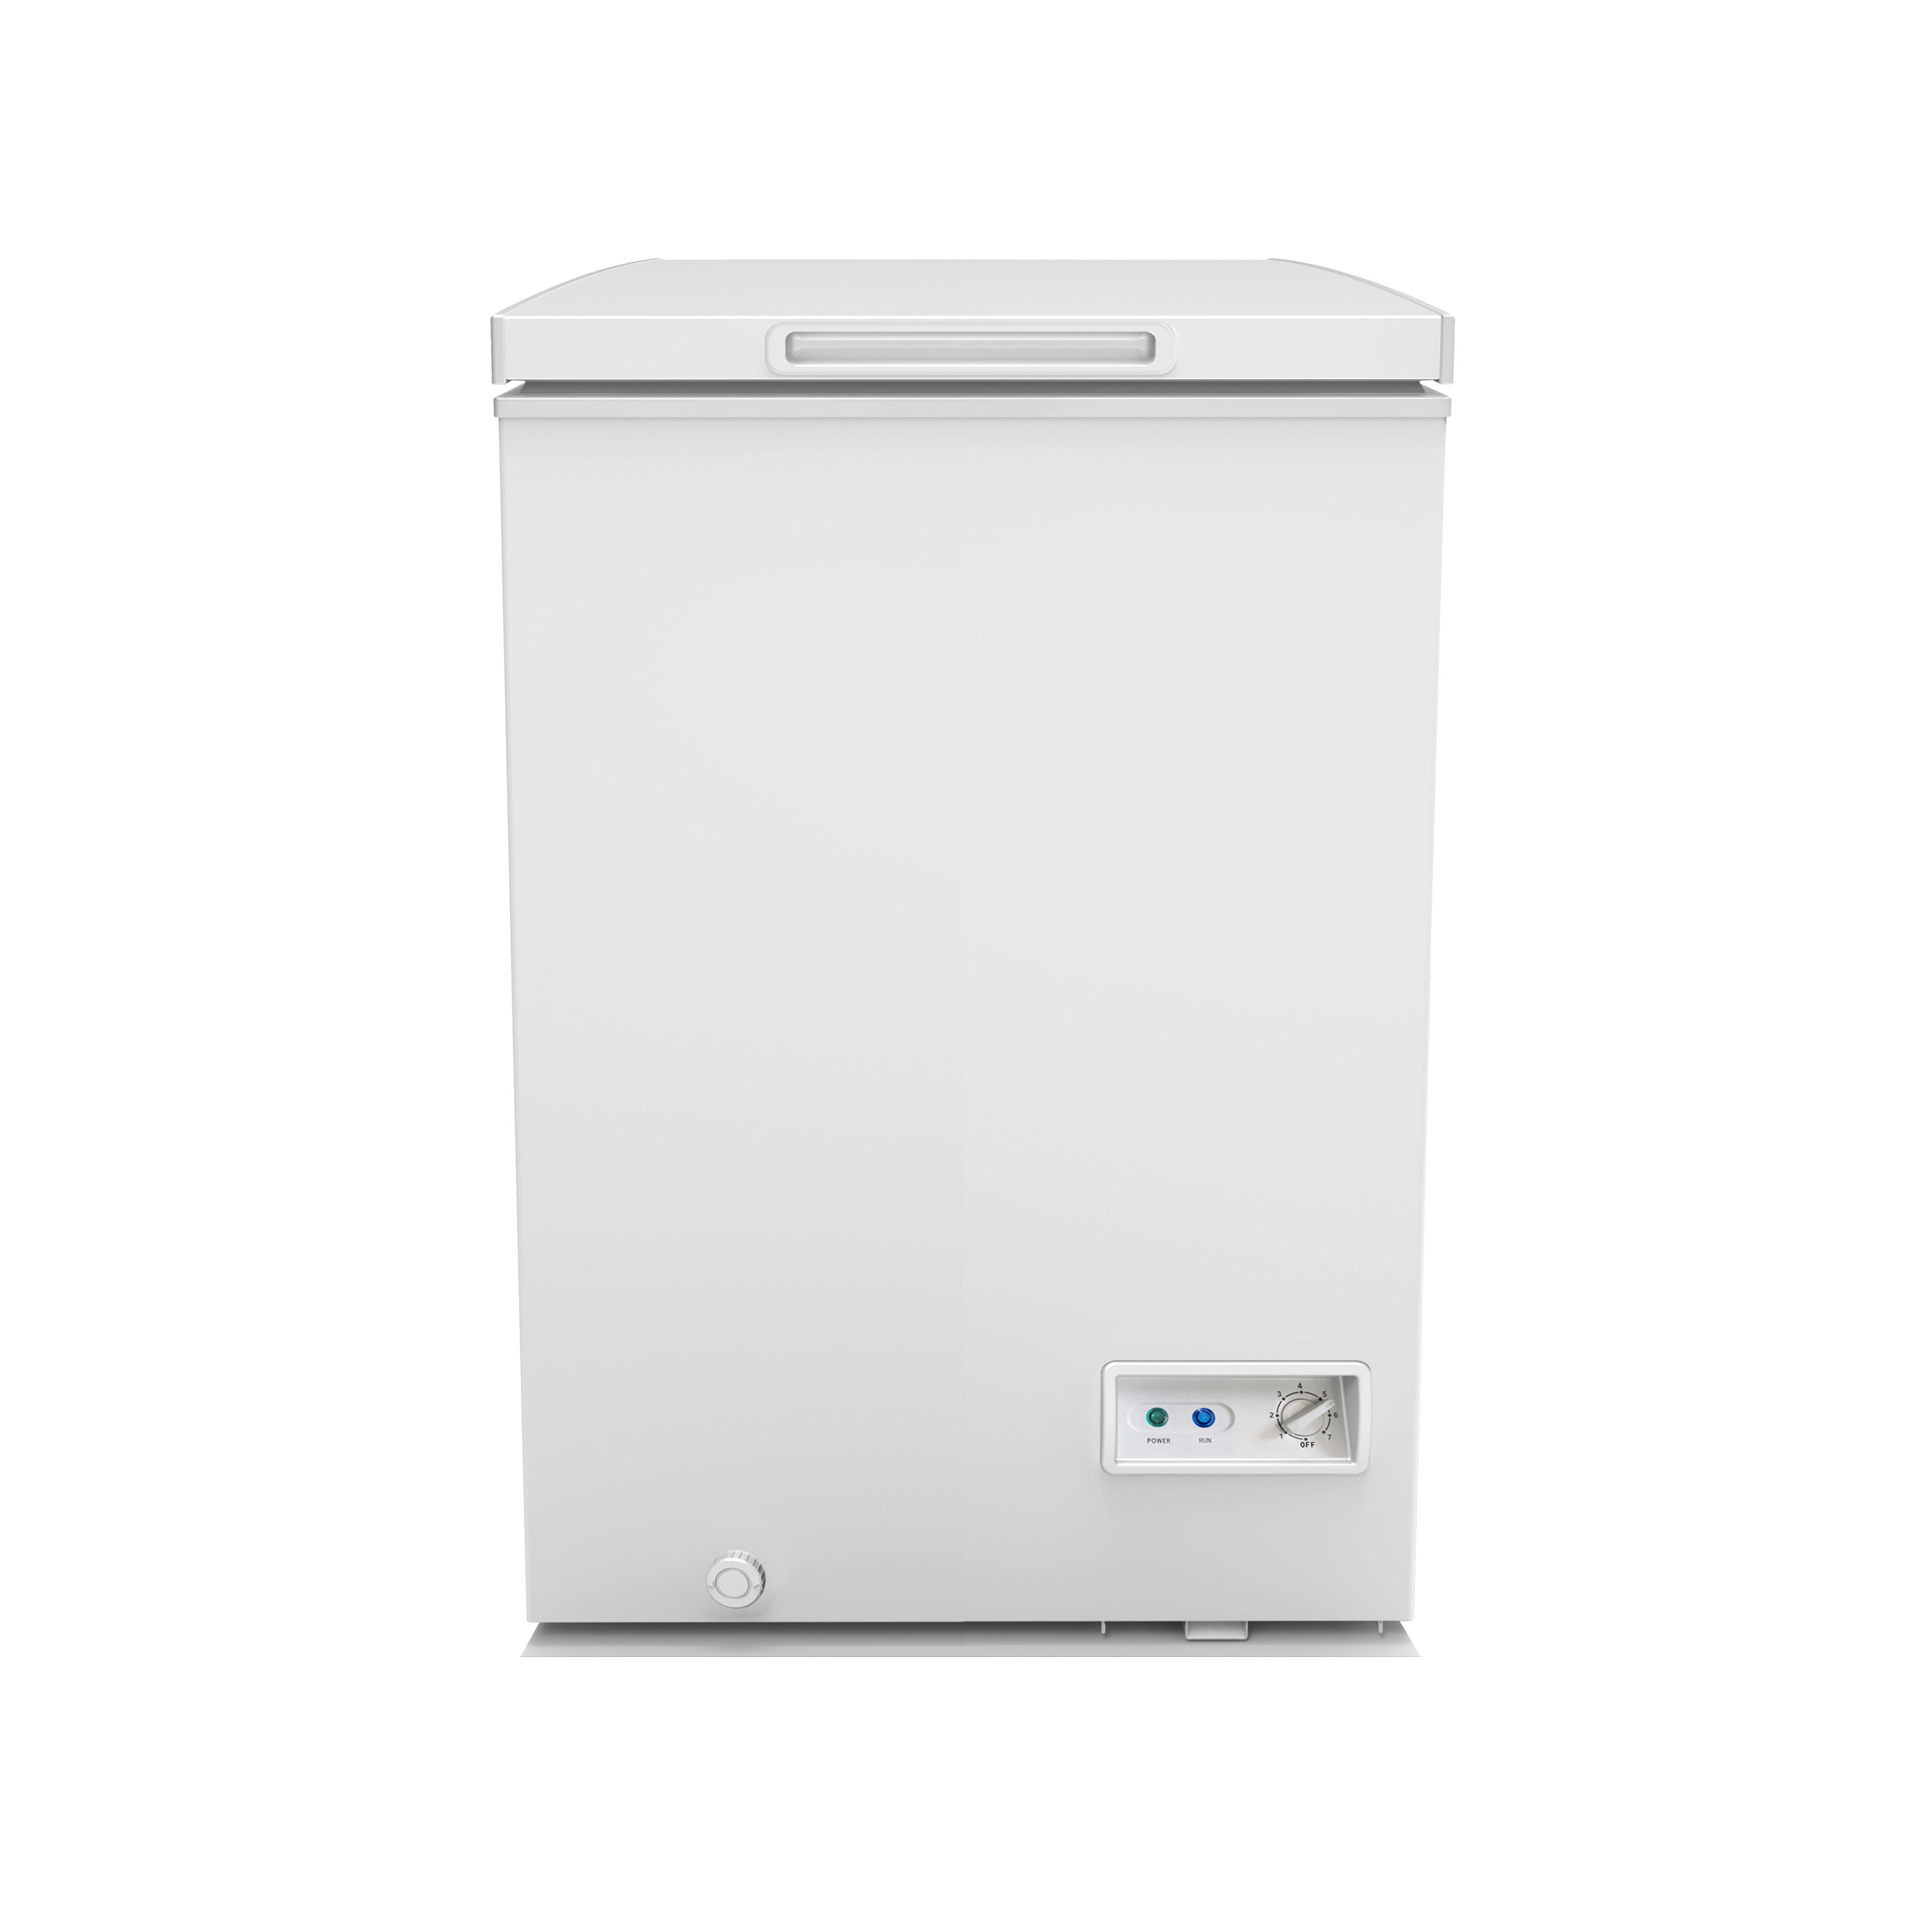 3.5-cu ft Manual Defrost Chest Freezer (White) ENERGY STAR in the